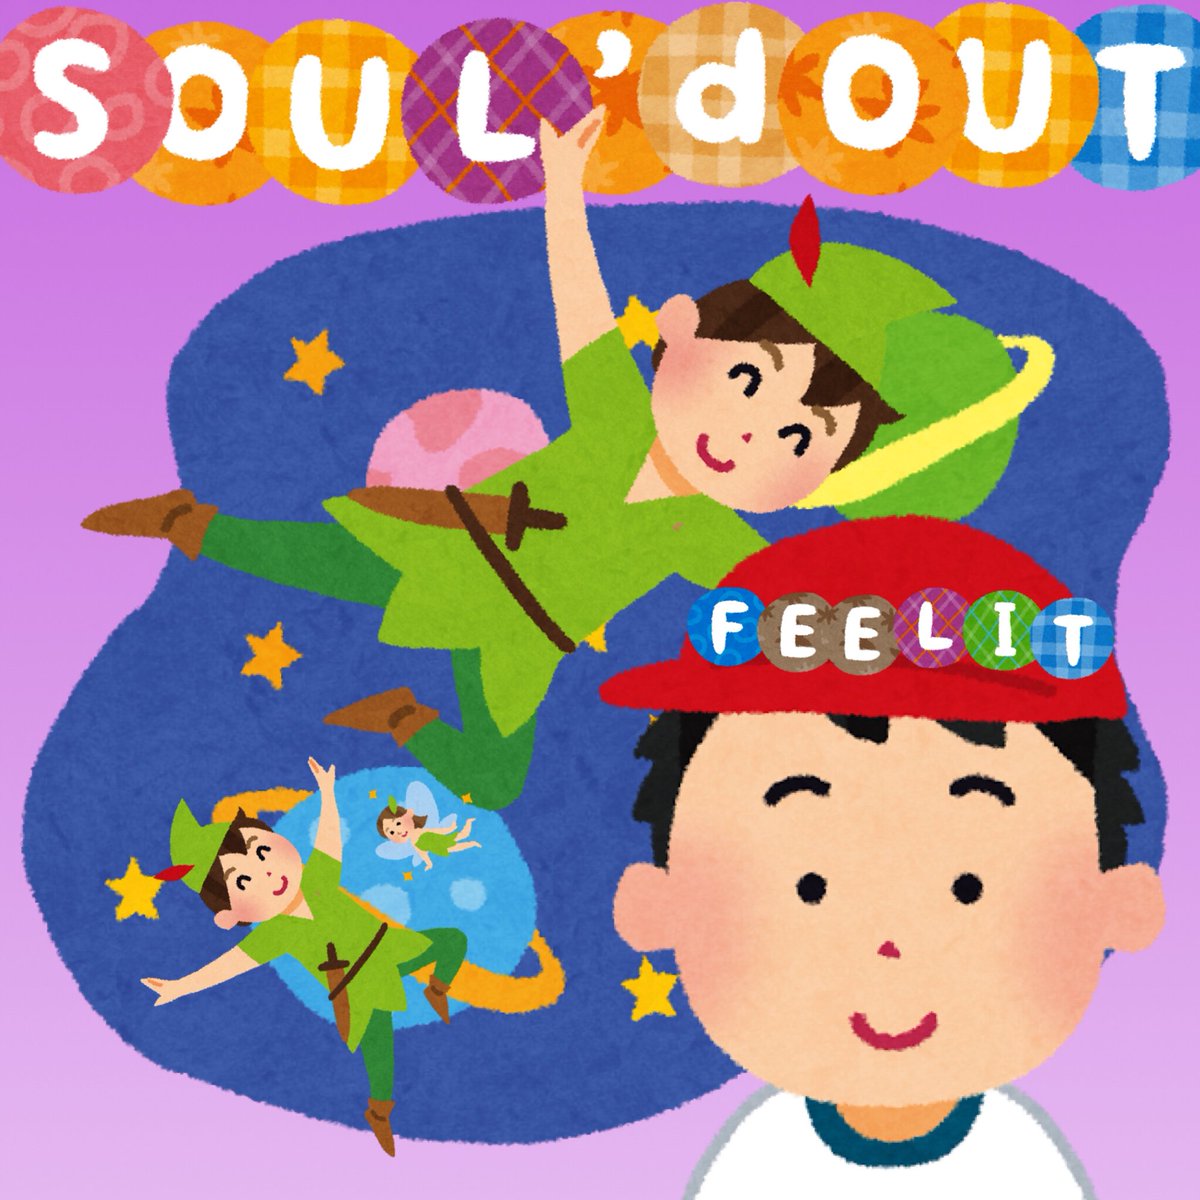 O Xrhsths Hiro Sto Twitter いらすとやさんの素材で名盤を再現してみる Feel It Soul D Out がんばったよ T Co 9zywmyagns